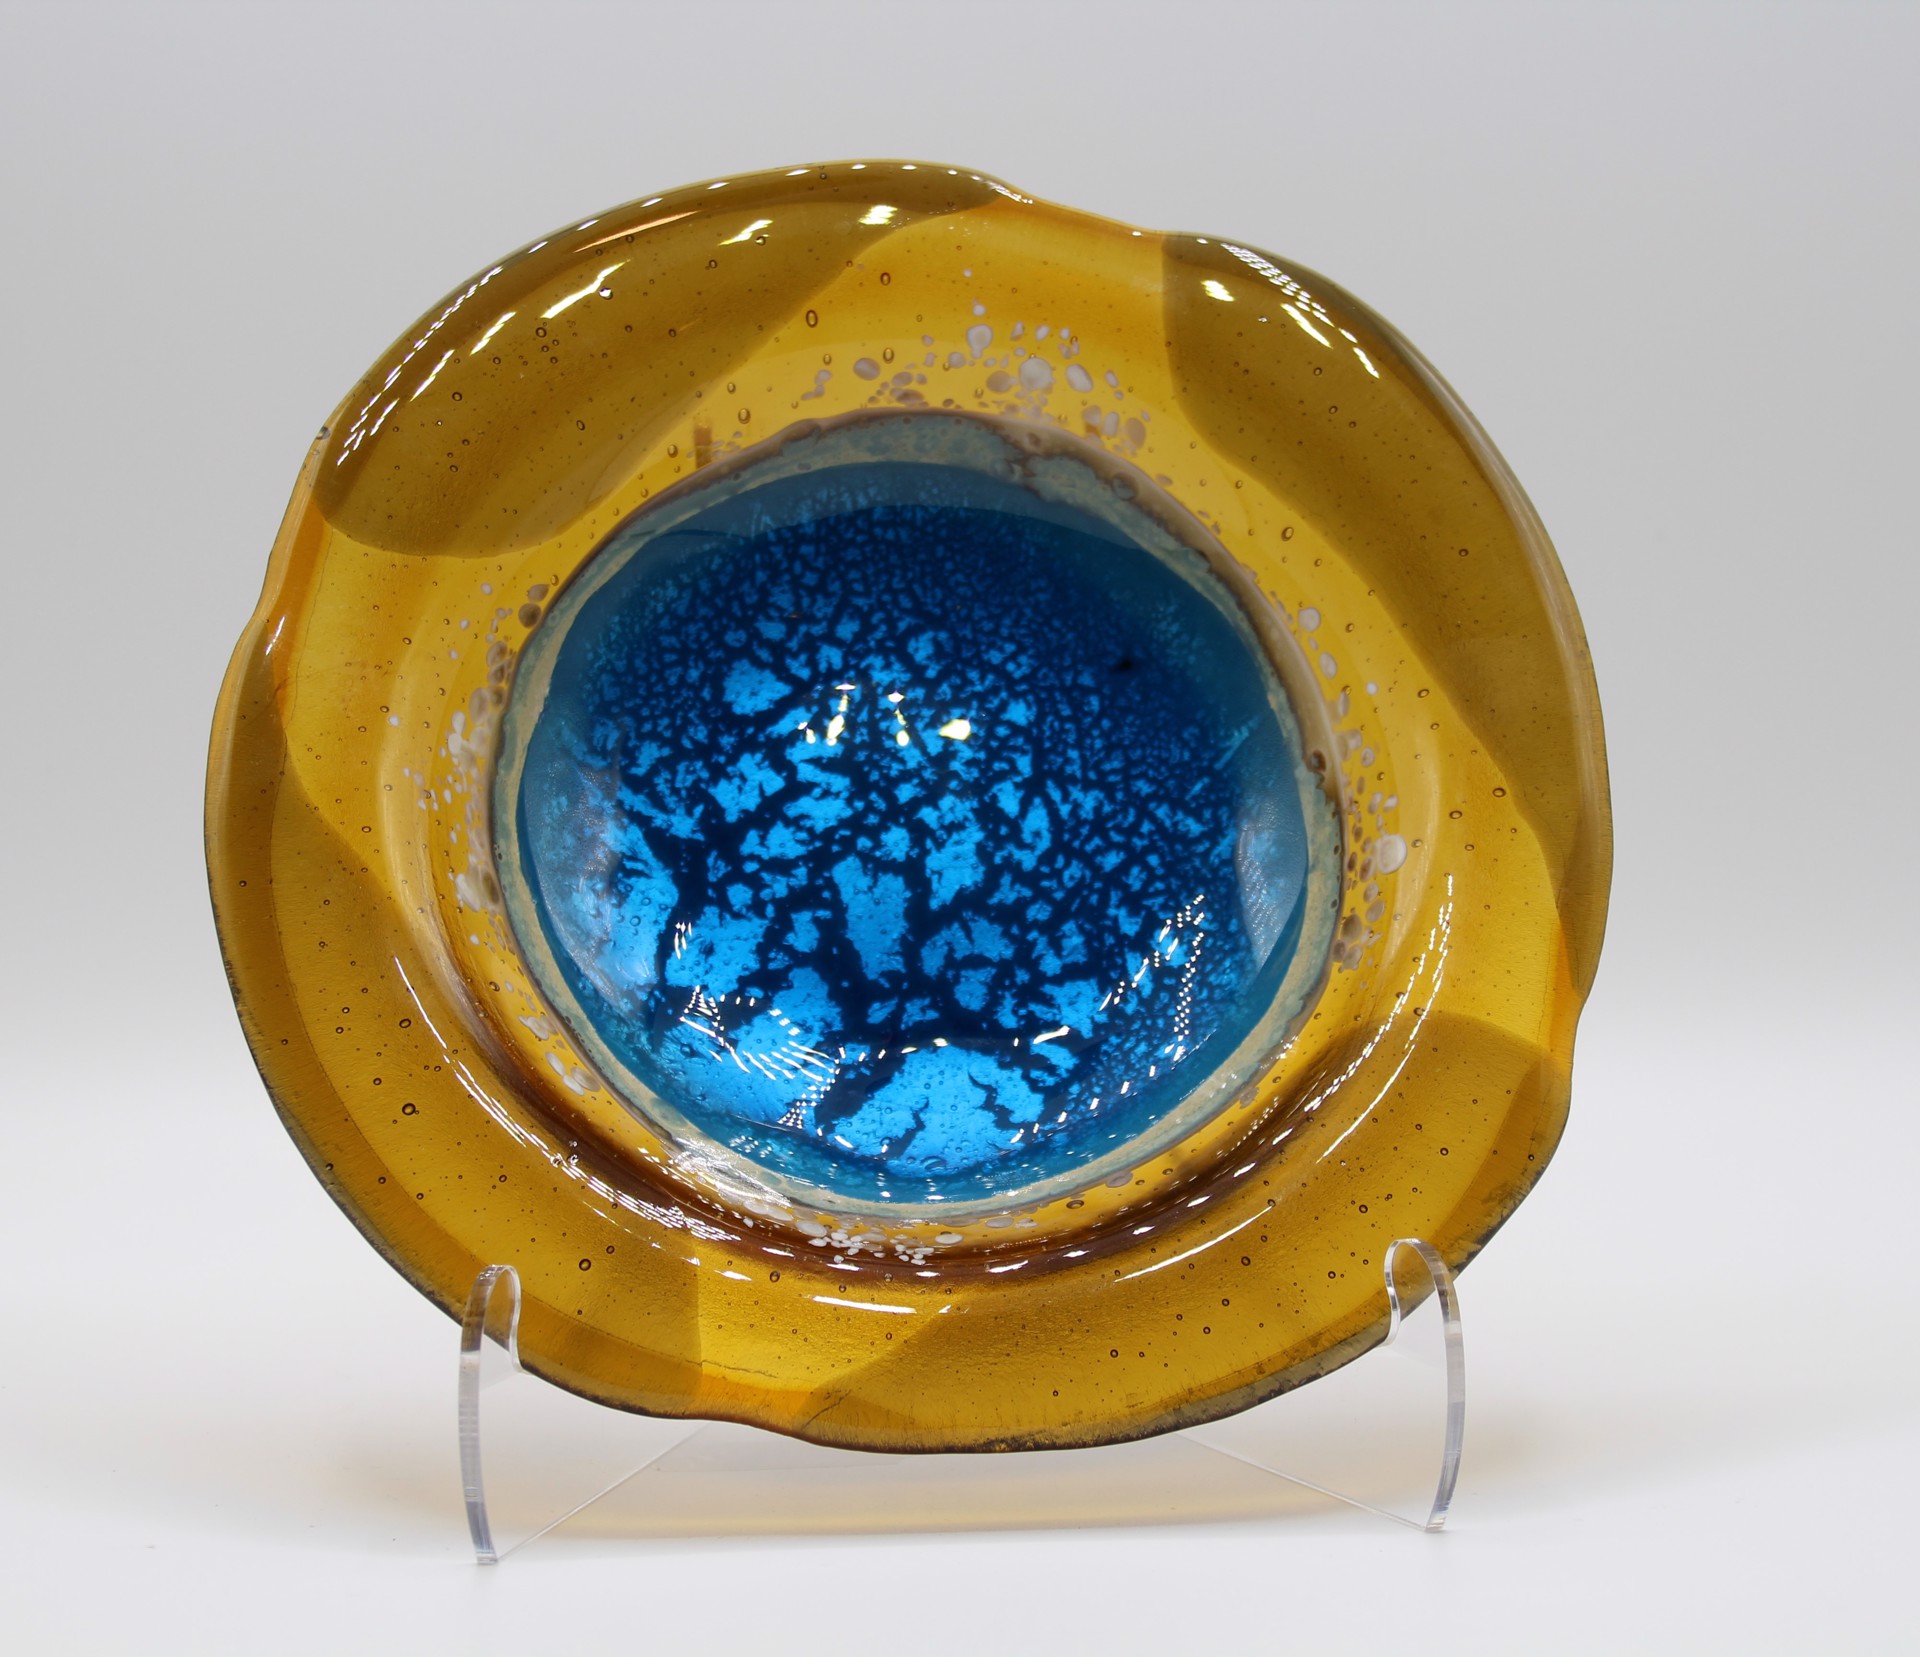 Thermal Puddle - Light 8" Bowl by Kathy Burk